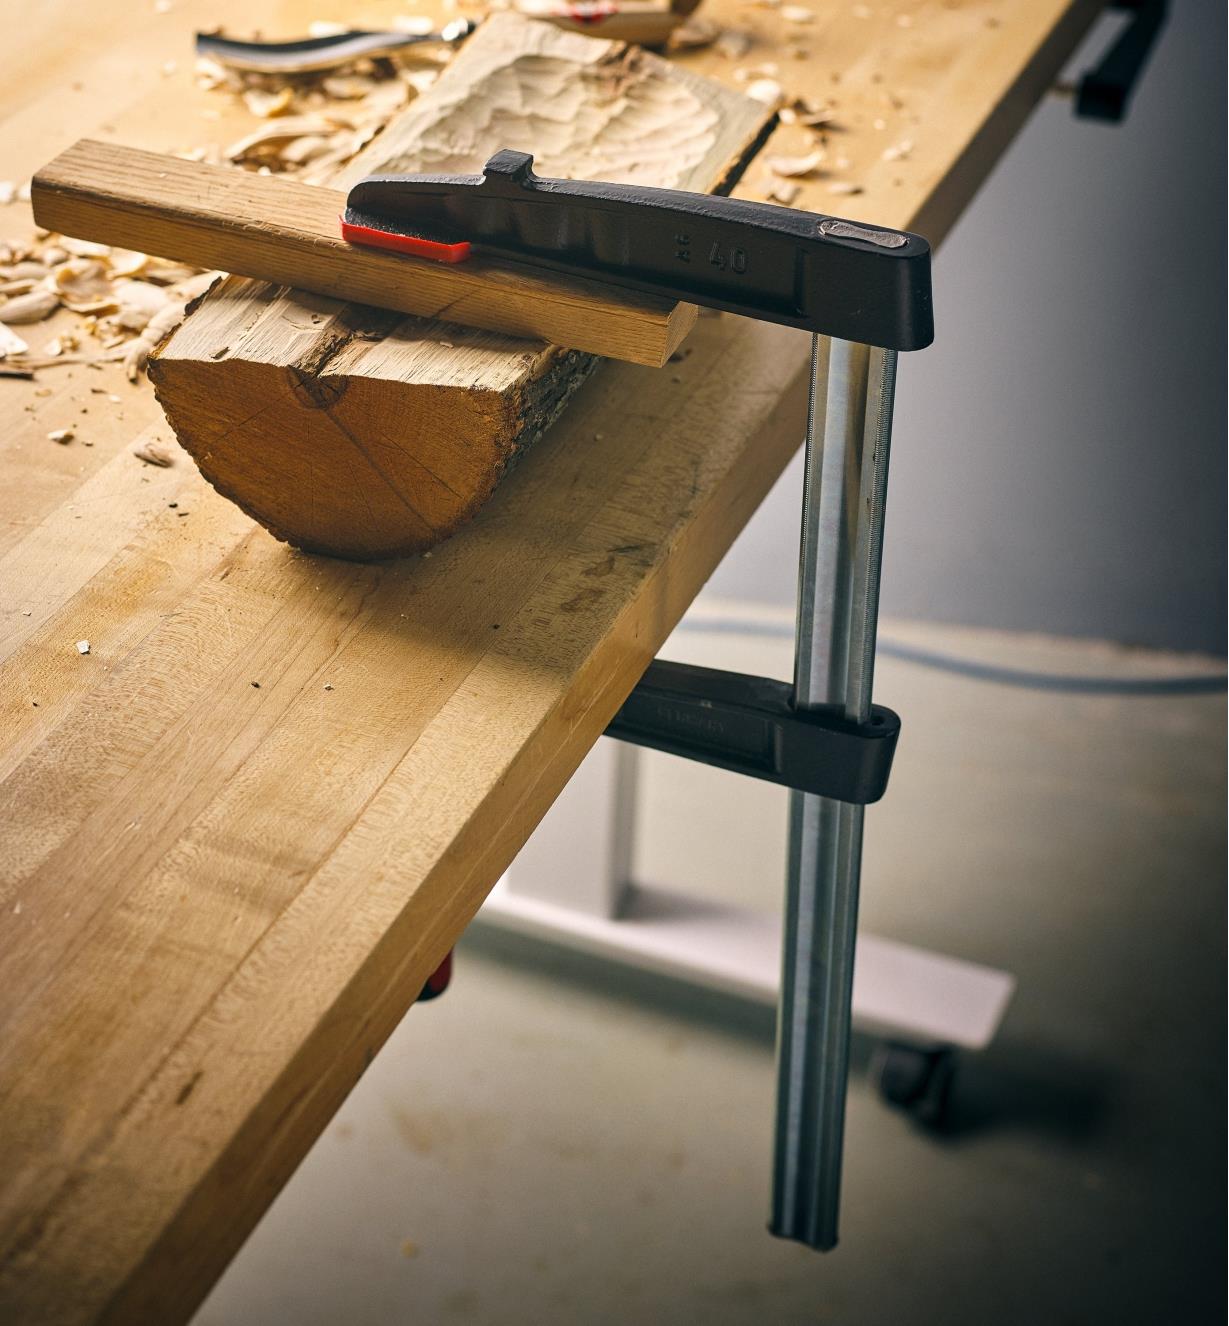 A Bessey 7" medium-duty FA clamp clamping a halved log to a workbench